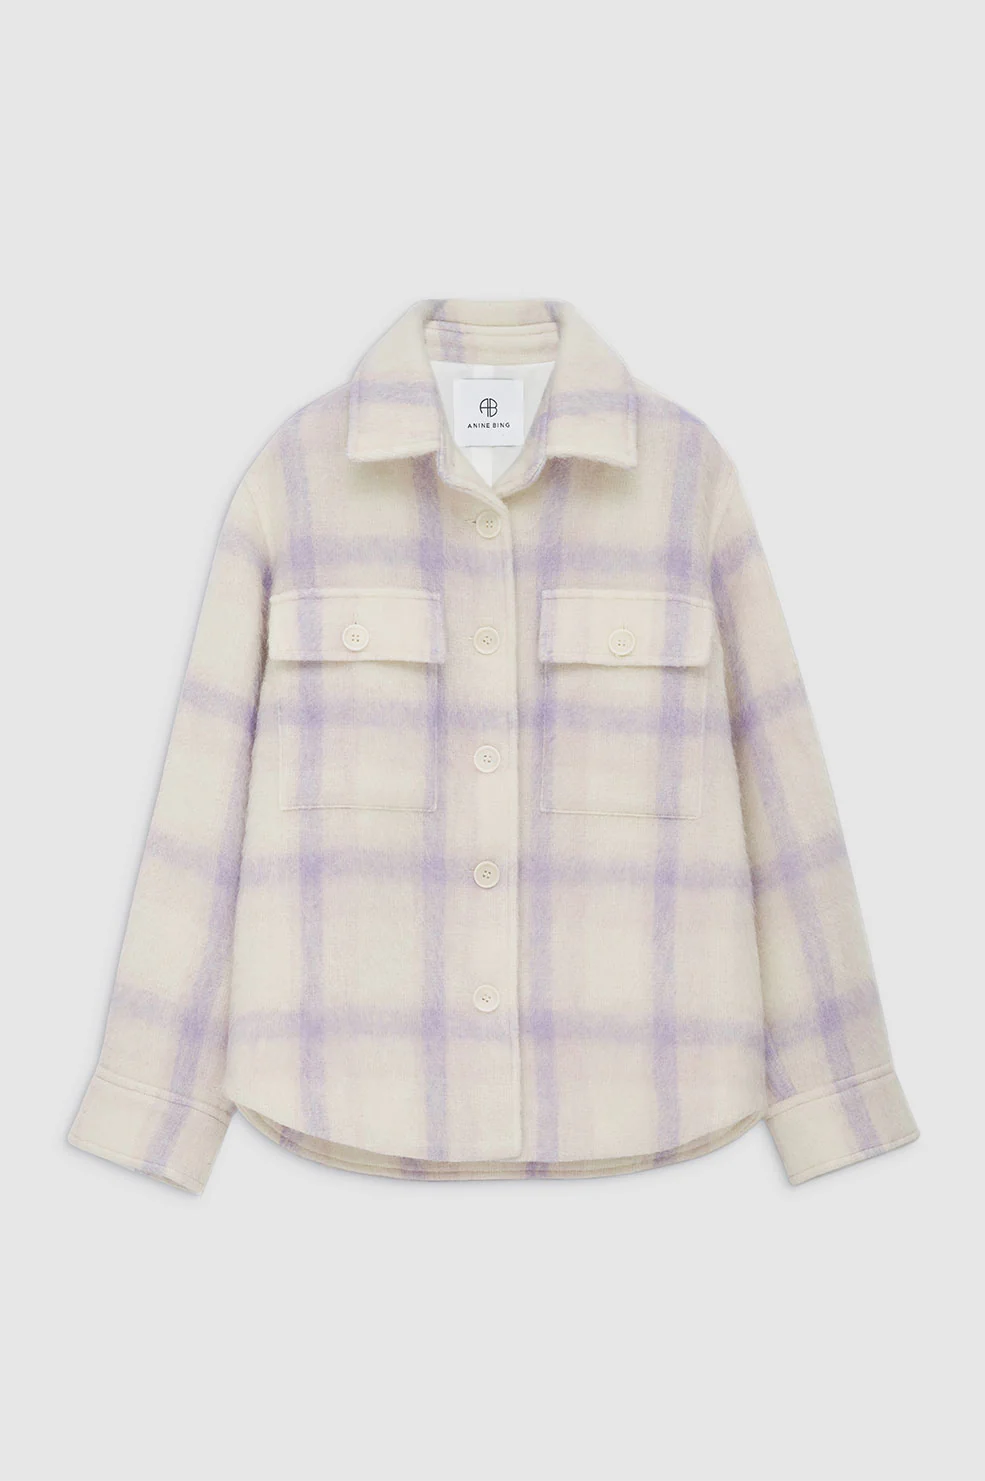 Anine Bing - Phoebe Jacket in Lavender and Cream Check